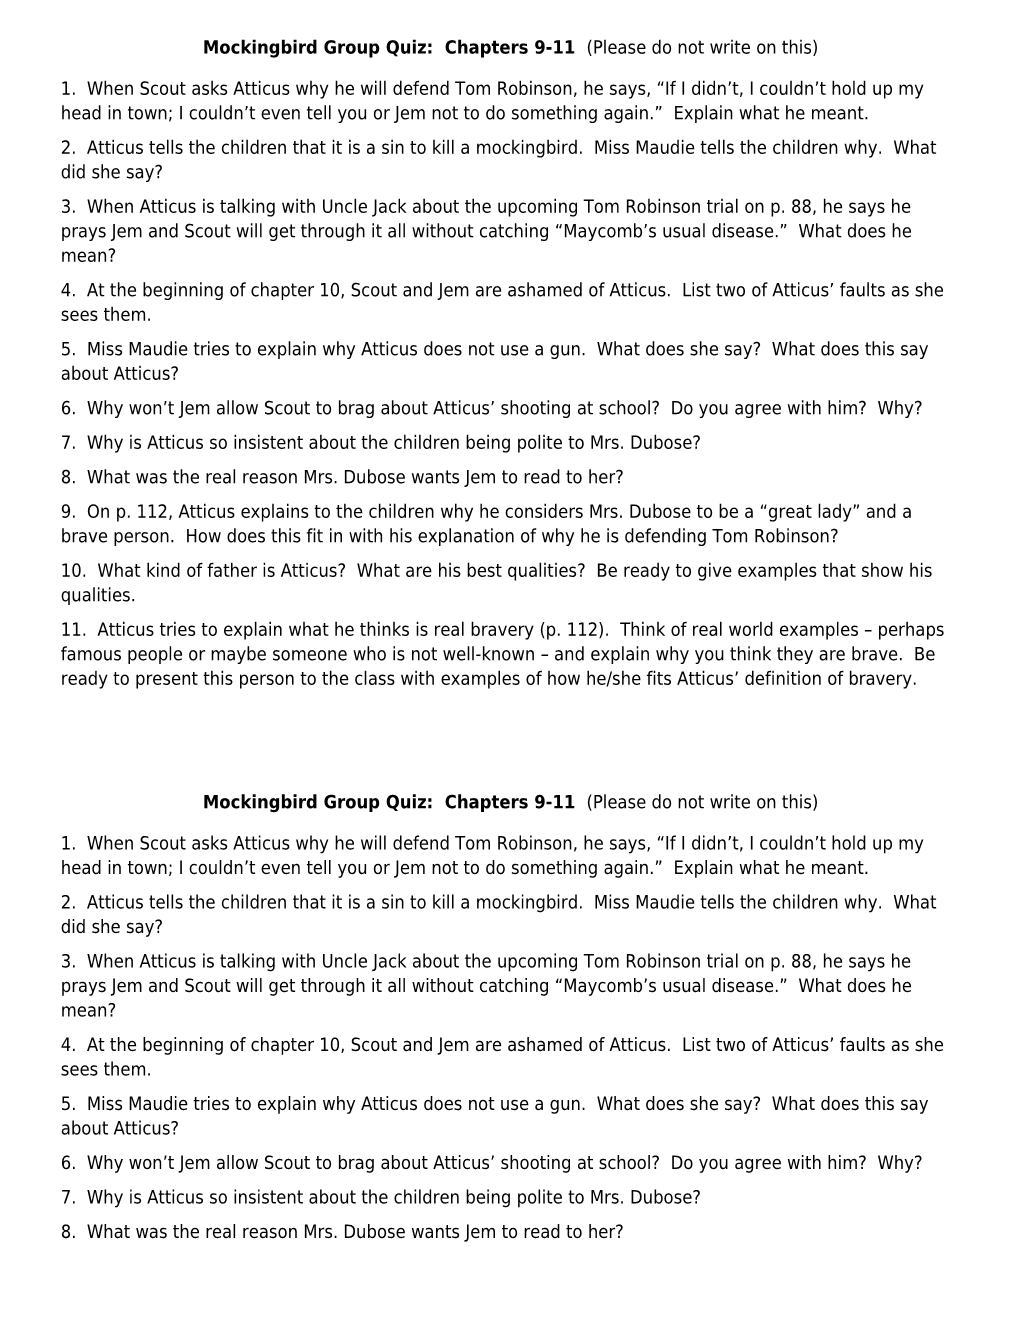 Mockingbird Group Quiz: Chapters 9-11 (Please Do Not Write on This)